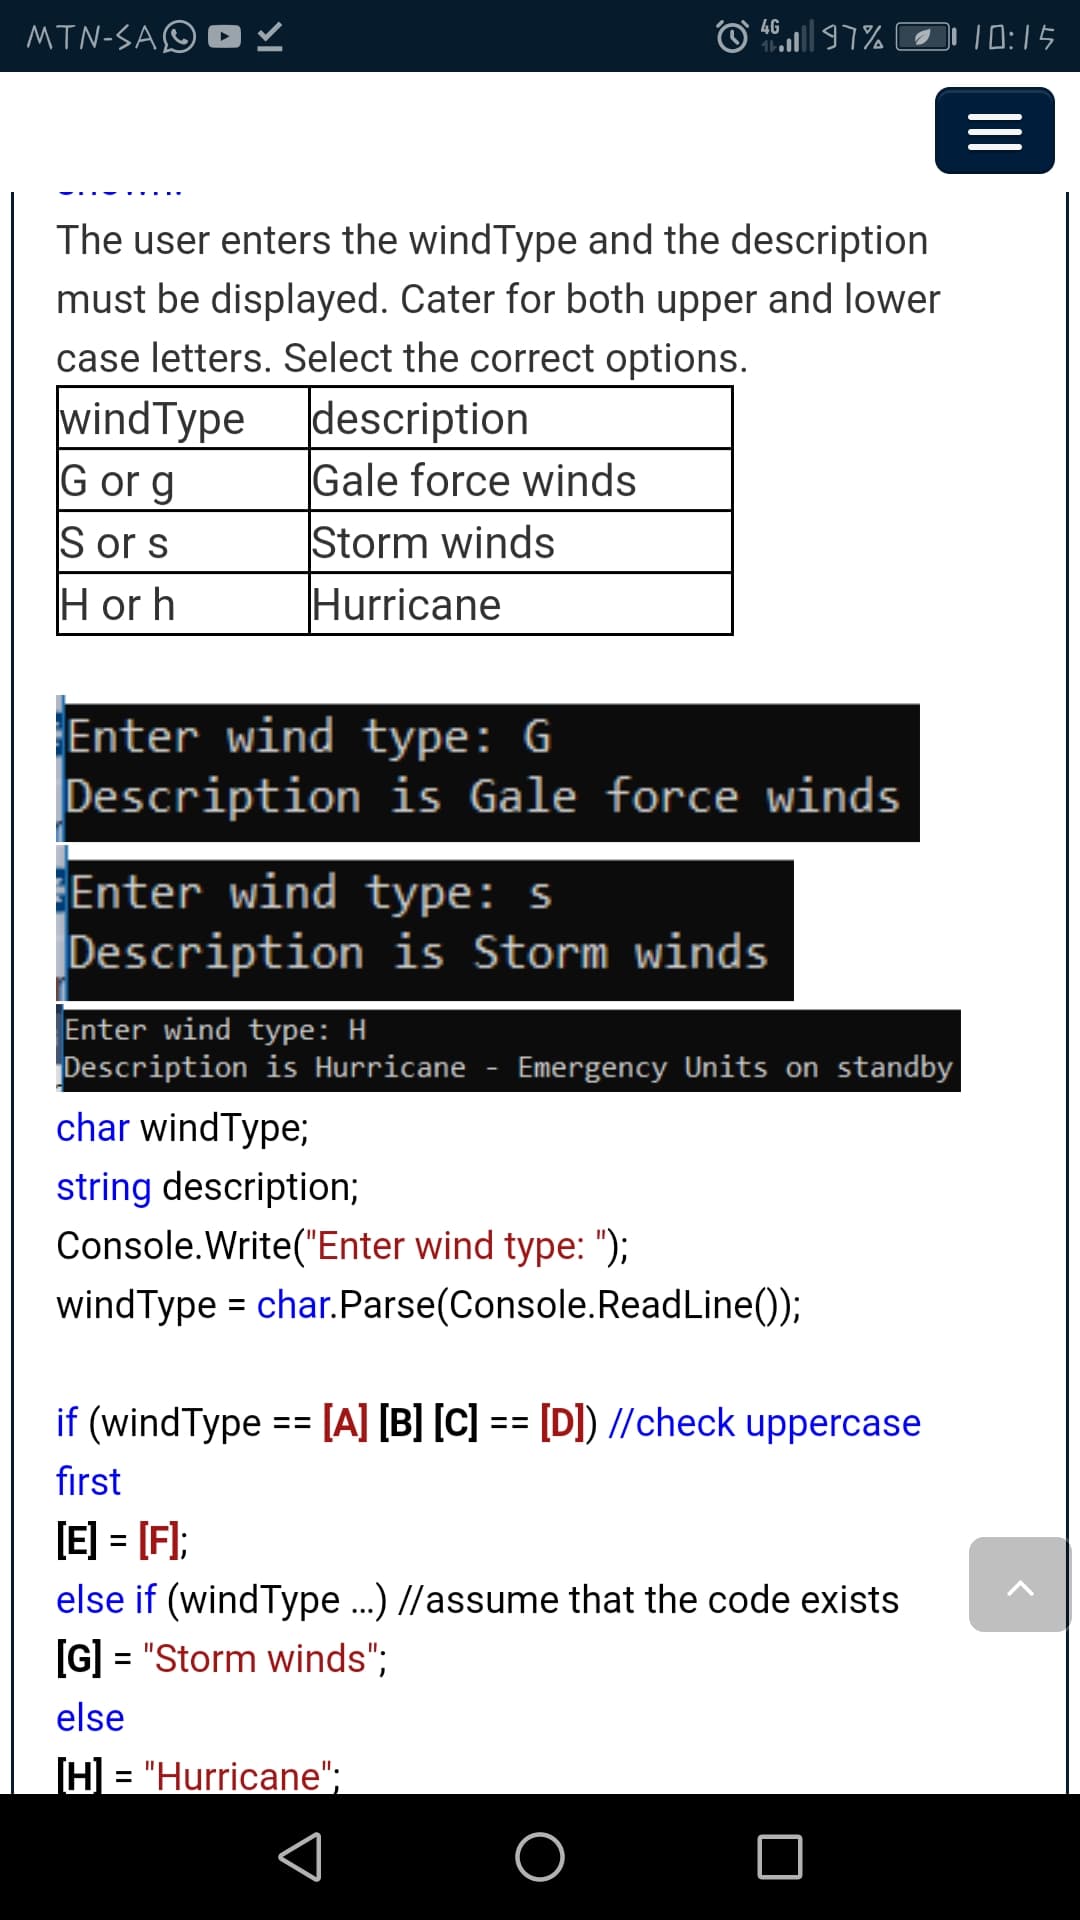 MTN-SAO D
4G
O 97% |1:15
The user enters the wind Type and the description
must be displayed. Cater for both upper and lower
case letters. Select the correct options.
windType description
Gale force winds
Storm winds
Hurricane
G or g
S or s
H or h
Enter wind type: G
Description is Gale force winds
Enter wind type: s
Description is Storm winds
Enter wind type: H
Description is Hurricane - Emergency Units on standby
char windType;
string description;
Console.Write("Enter wind type: ");
windType = char.Parse(Console.ReadLine());
%3D
if (windType == [A] [B] [C] == [D]) //check uppercase
first
[E] = [F);
else if (windType.) //assume that the code exists
[G] = "Storm winds";
%3D
else
[H] = "Hurricane";
